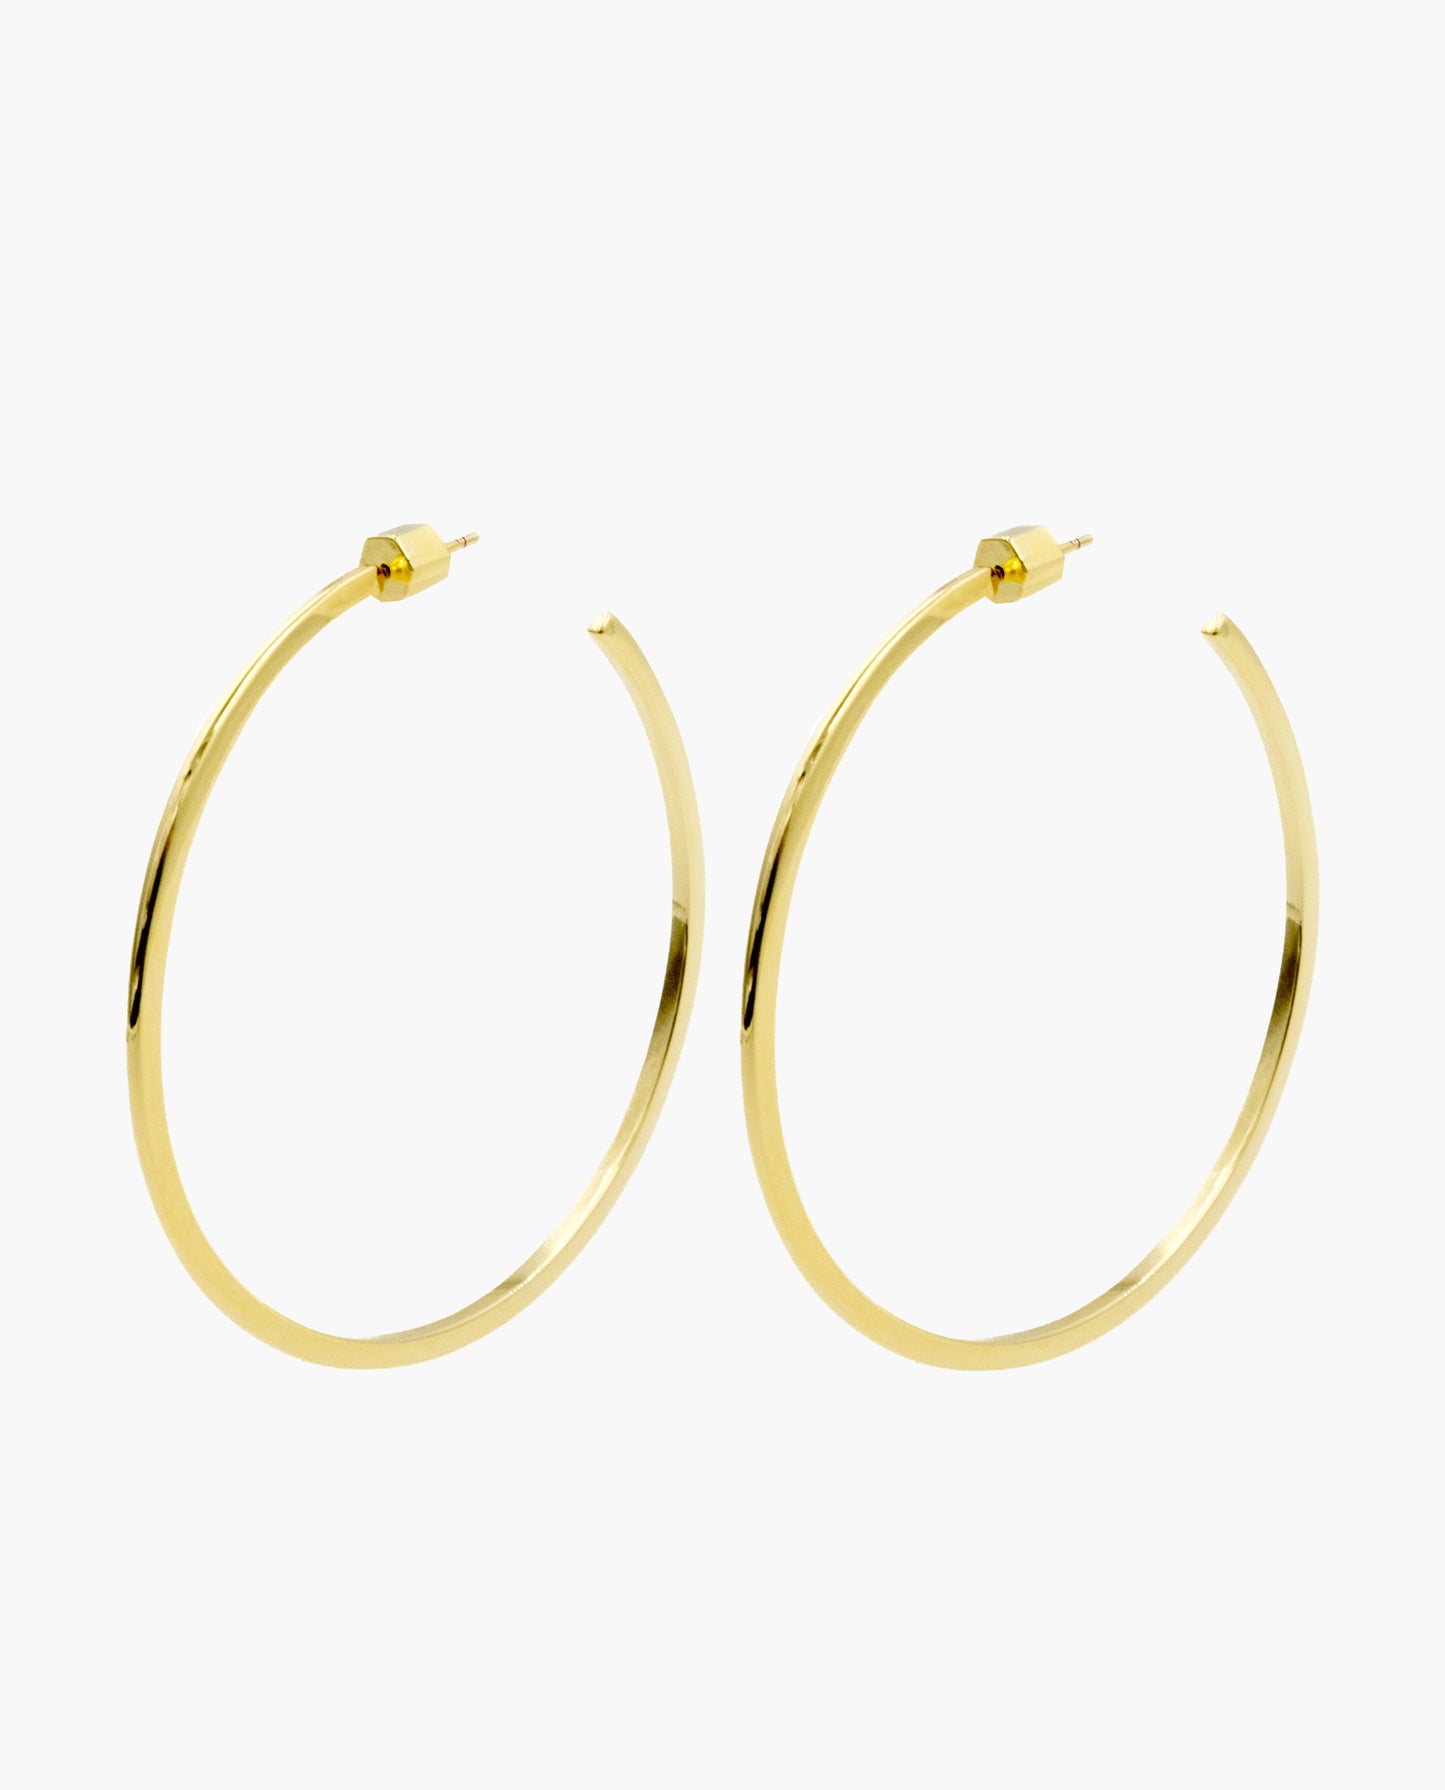 CLASSIC HOOPS - GOLD PLATED